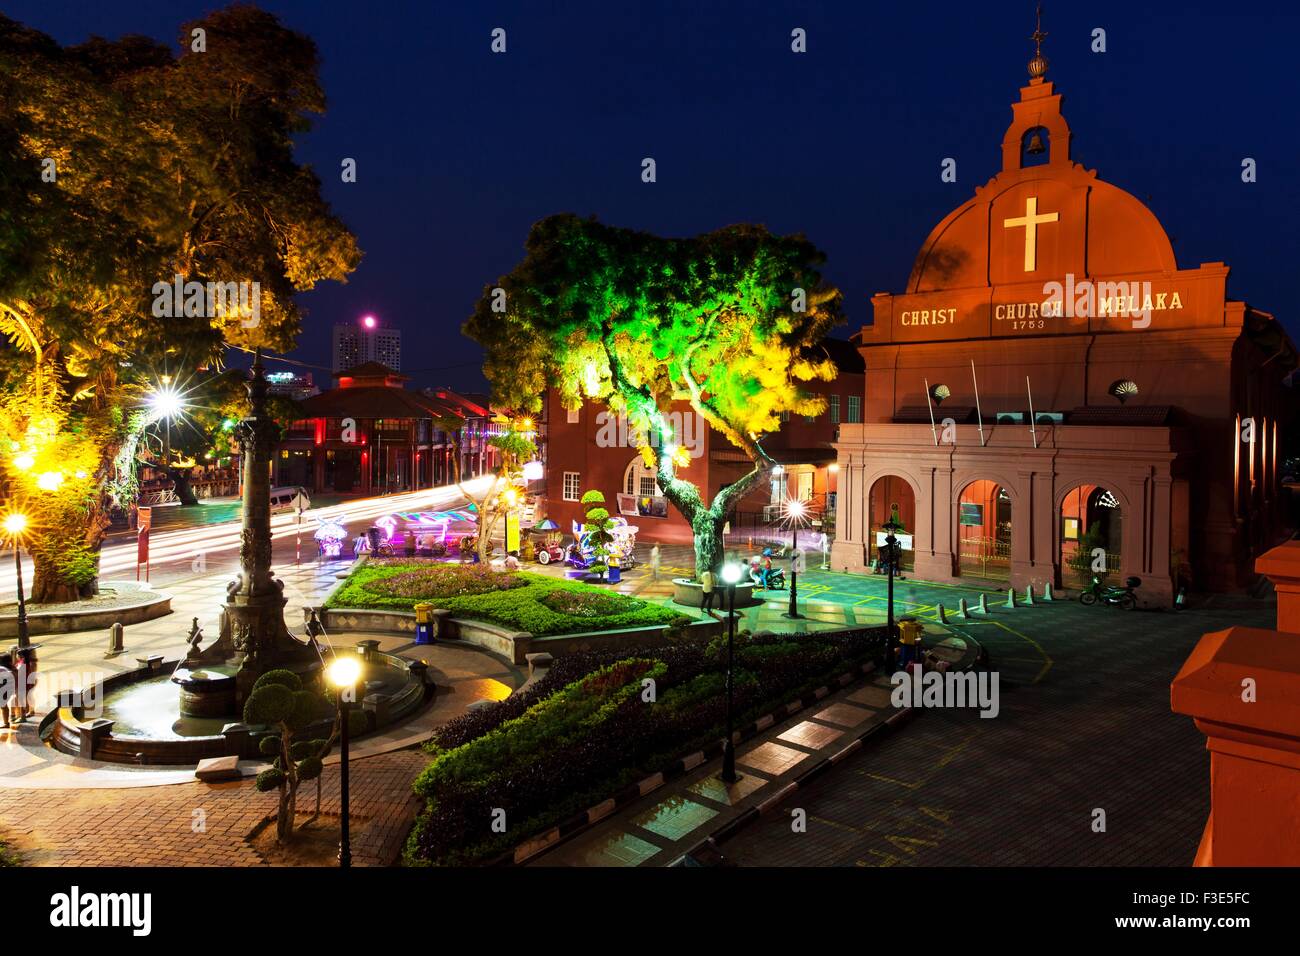 Malacca, Malaysia - 09 August 2014: Night view of the Christ Church and the Dutch Square on 09 August 2014, Malacca, Malaysia. Stock Photo